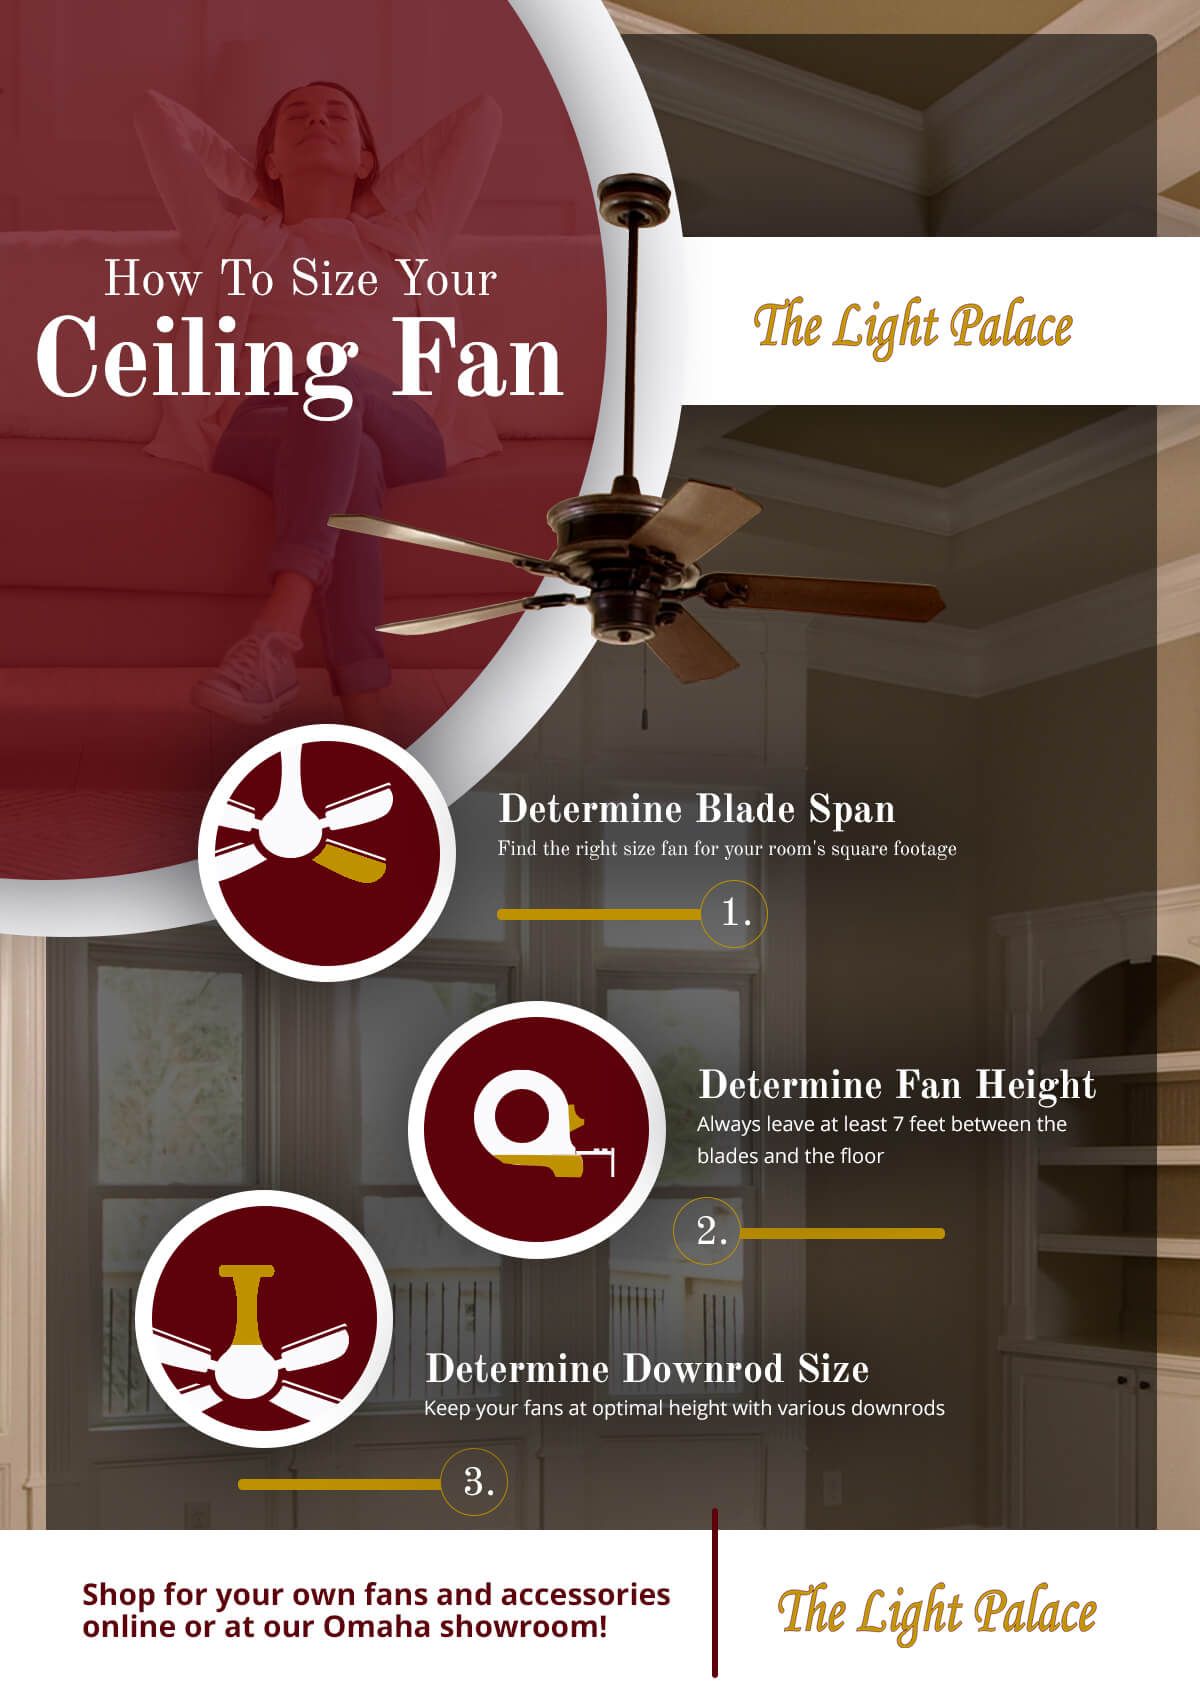 2021-06-14-TheLightPalace-Infographic-60c76a0dd2f82.jpg